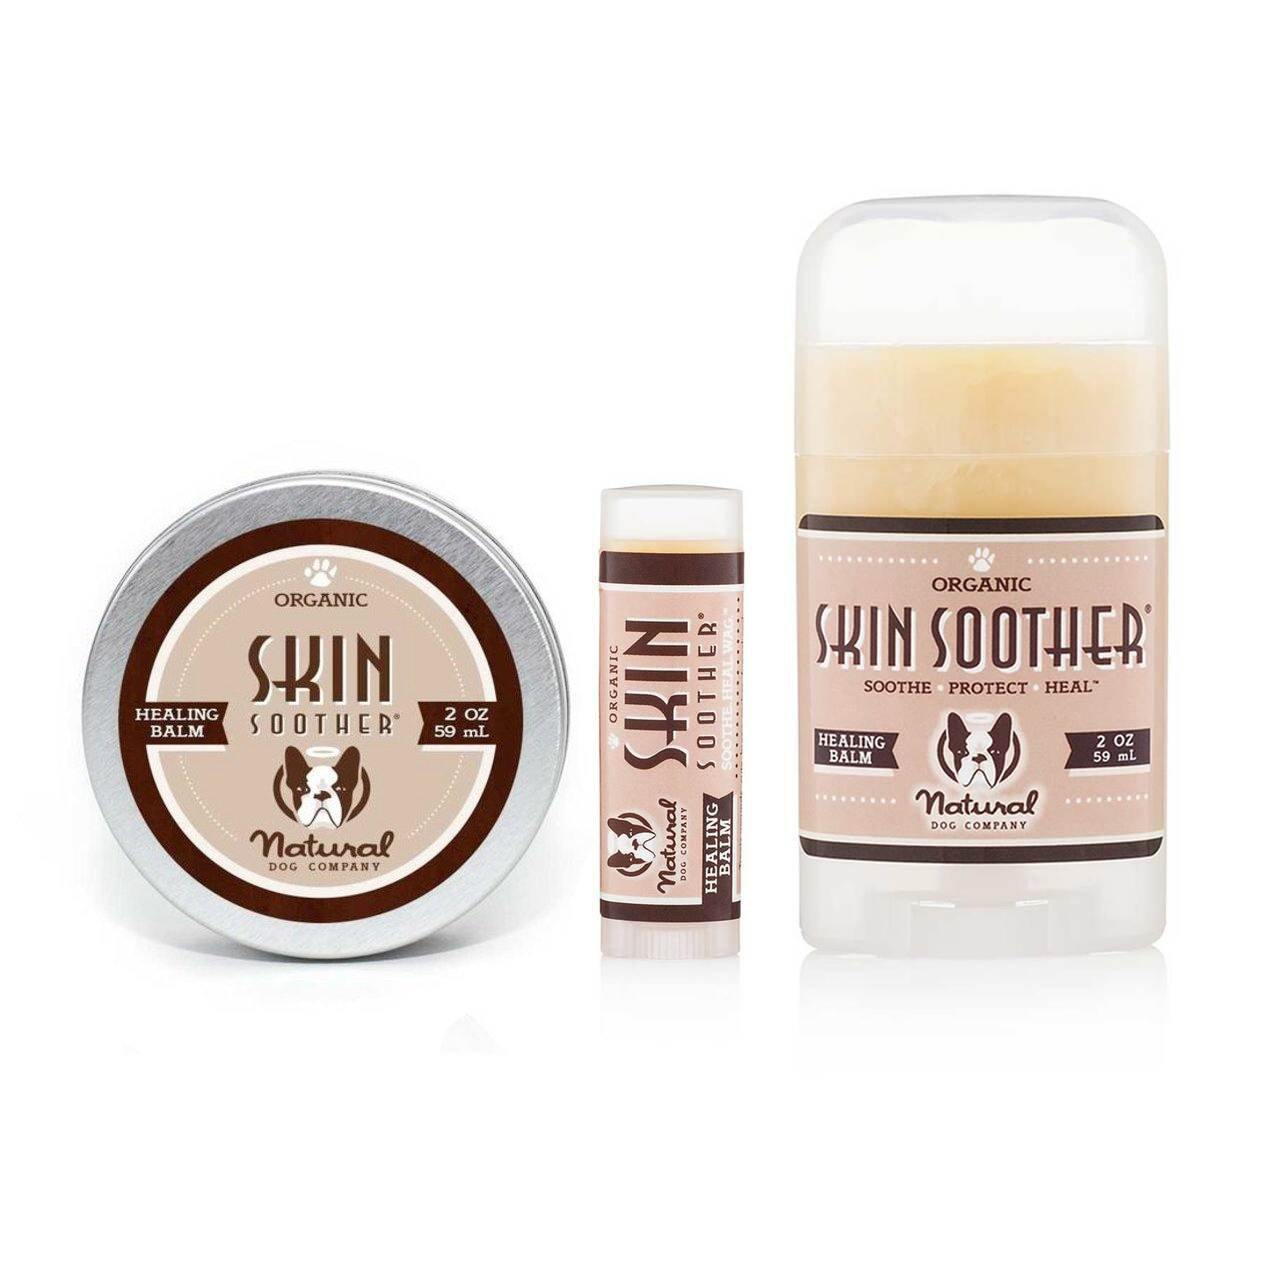 Skin Soother balm - Pet-à-Porter